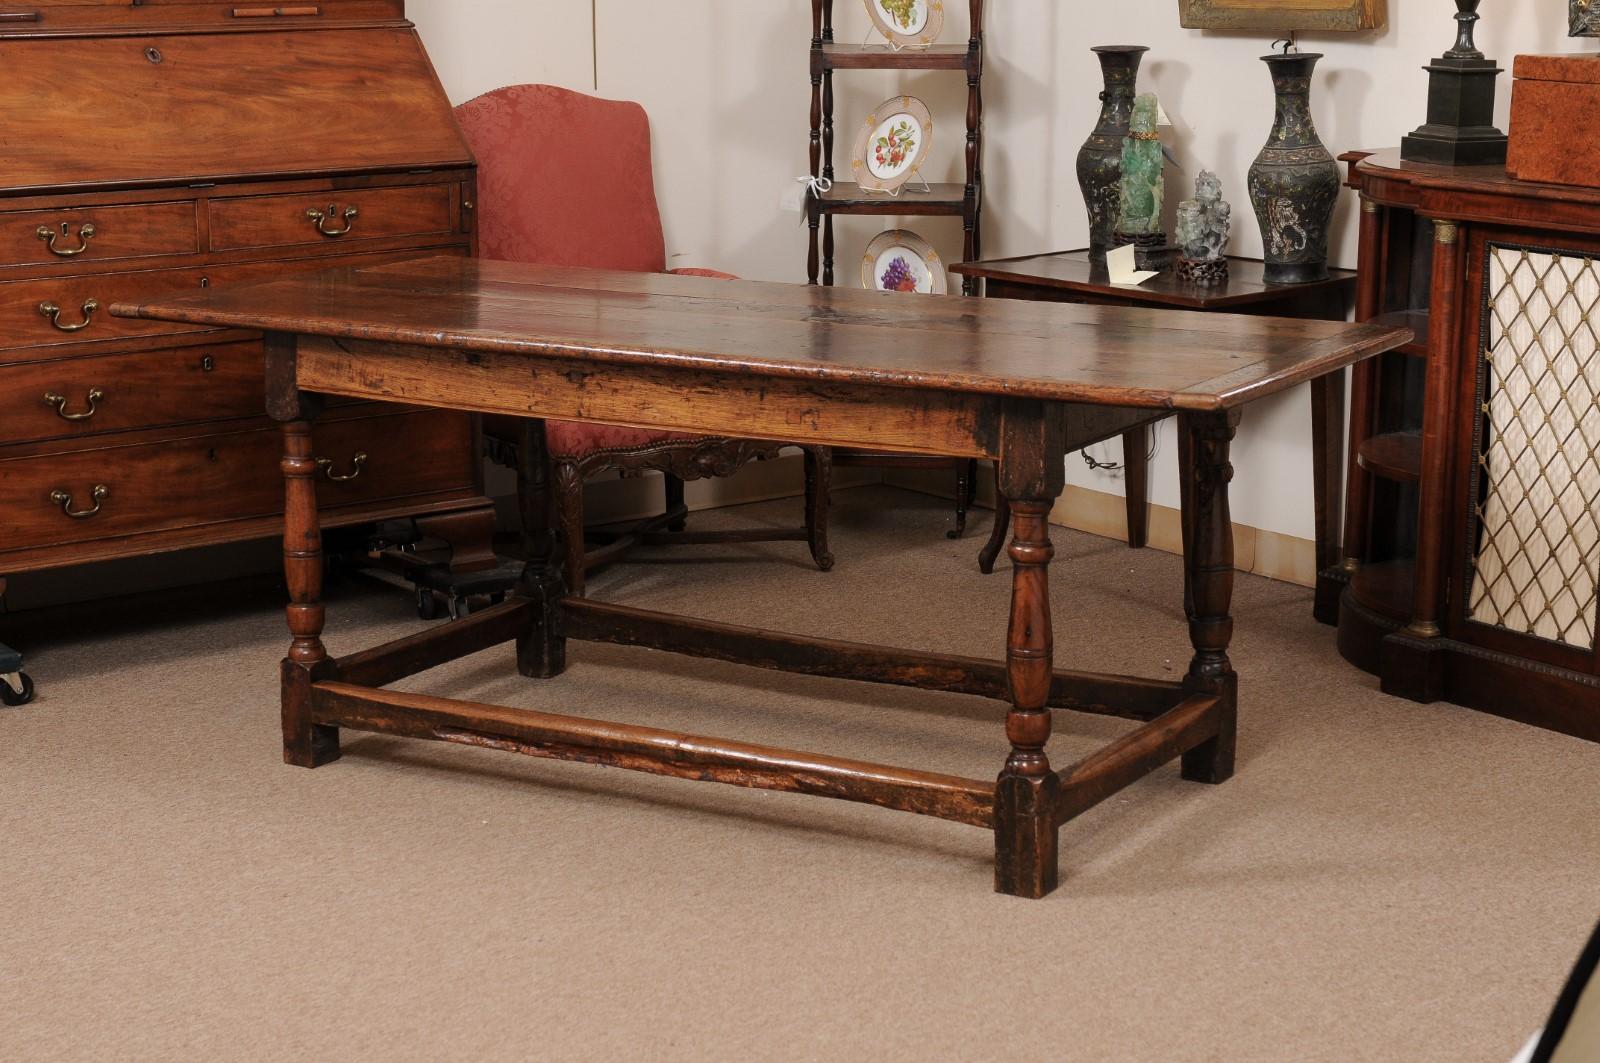  Early 18th Century English Long Oak Hall Table with Carved Frieze, Turned Legs  For Sale 9